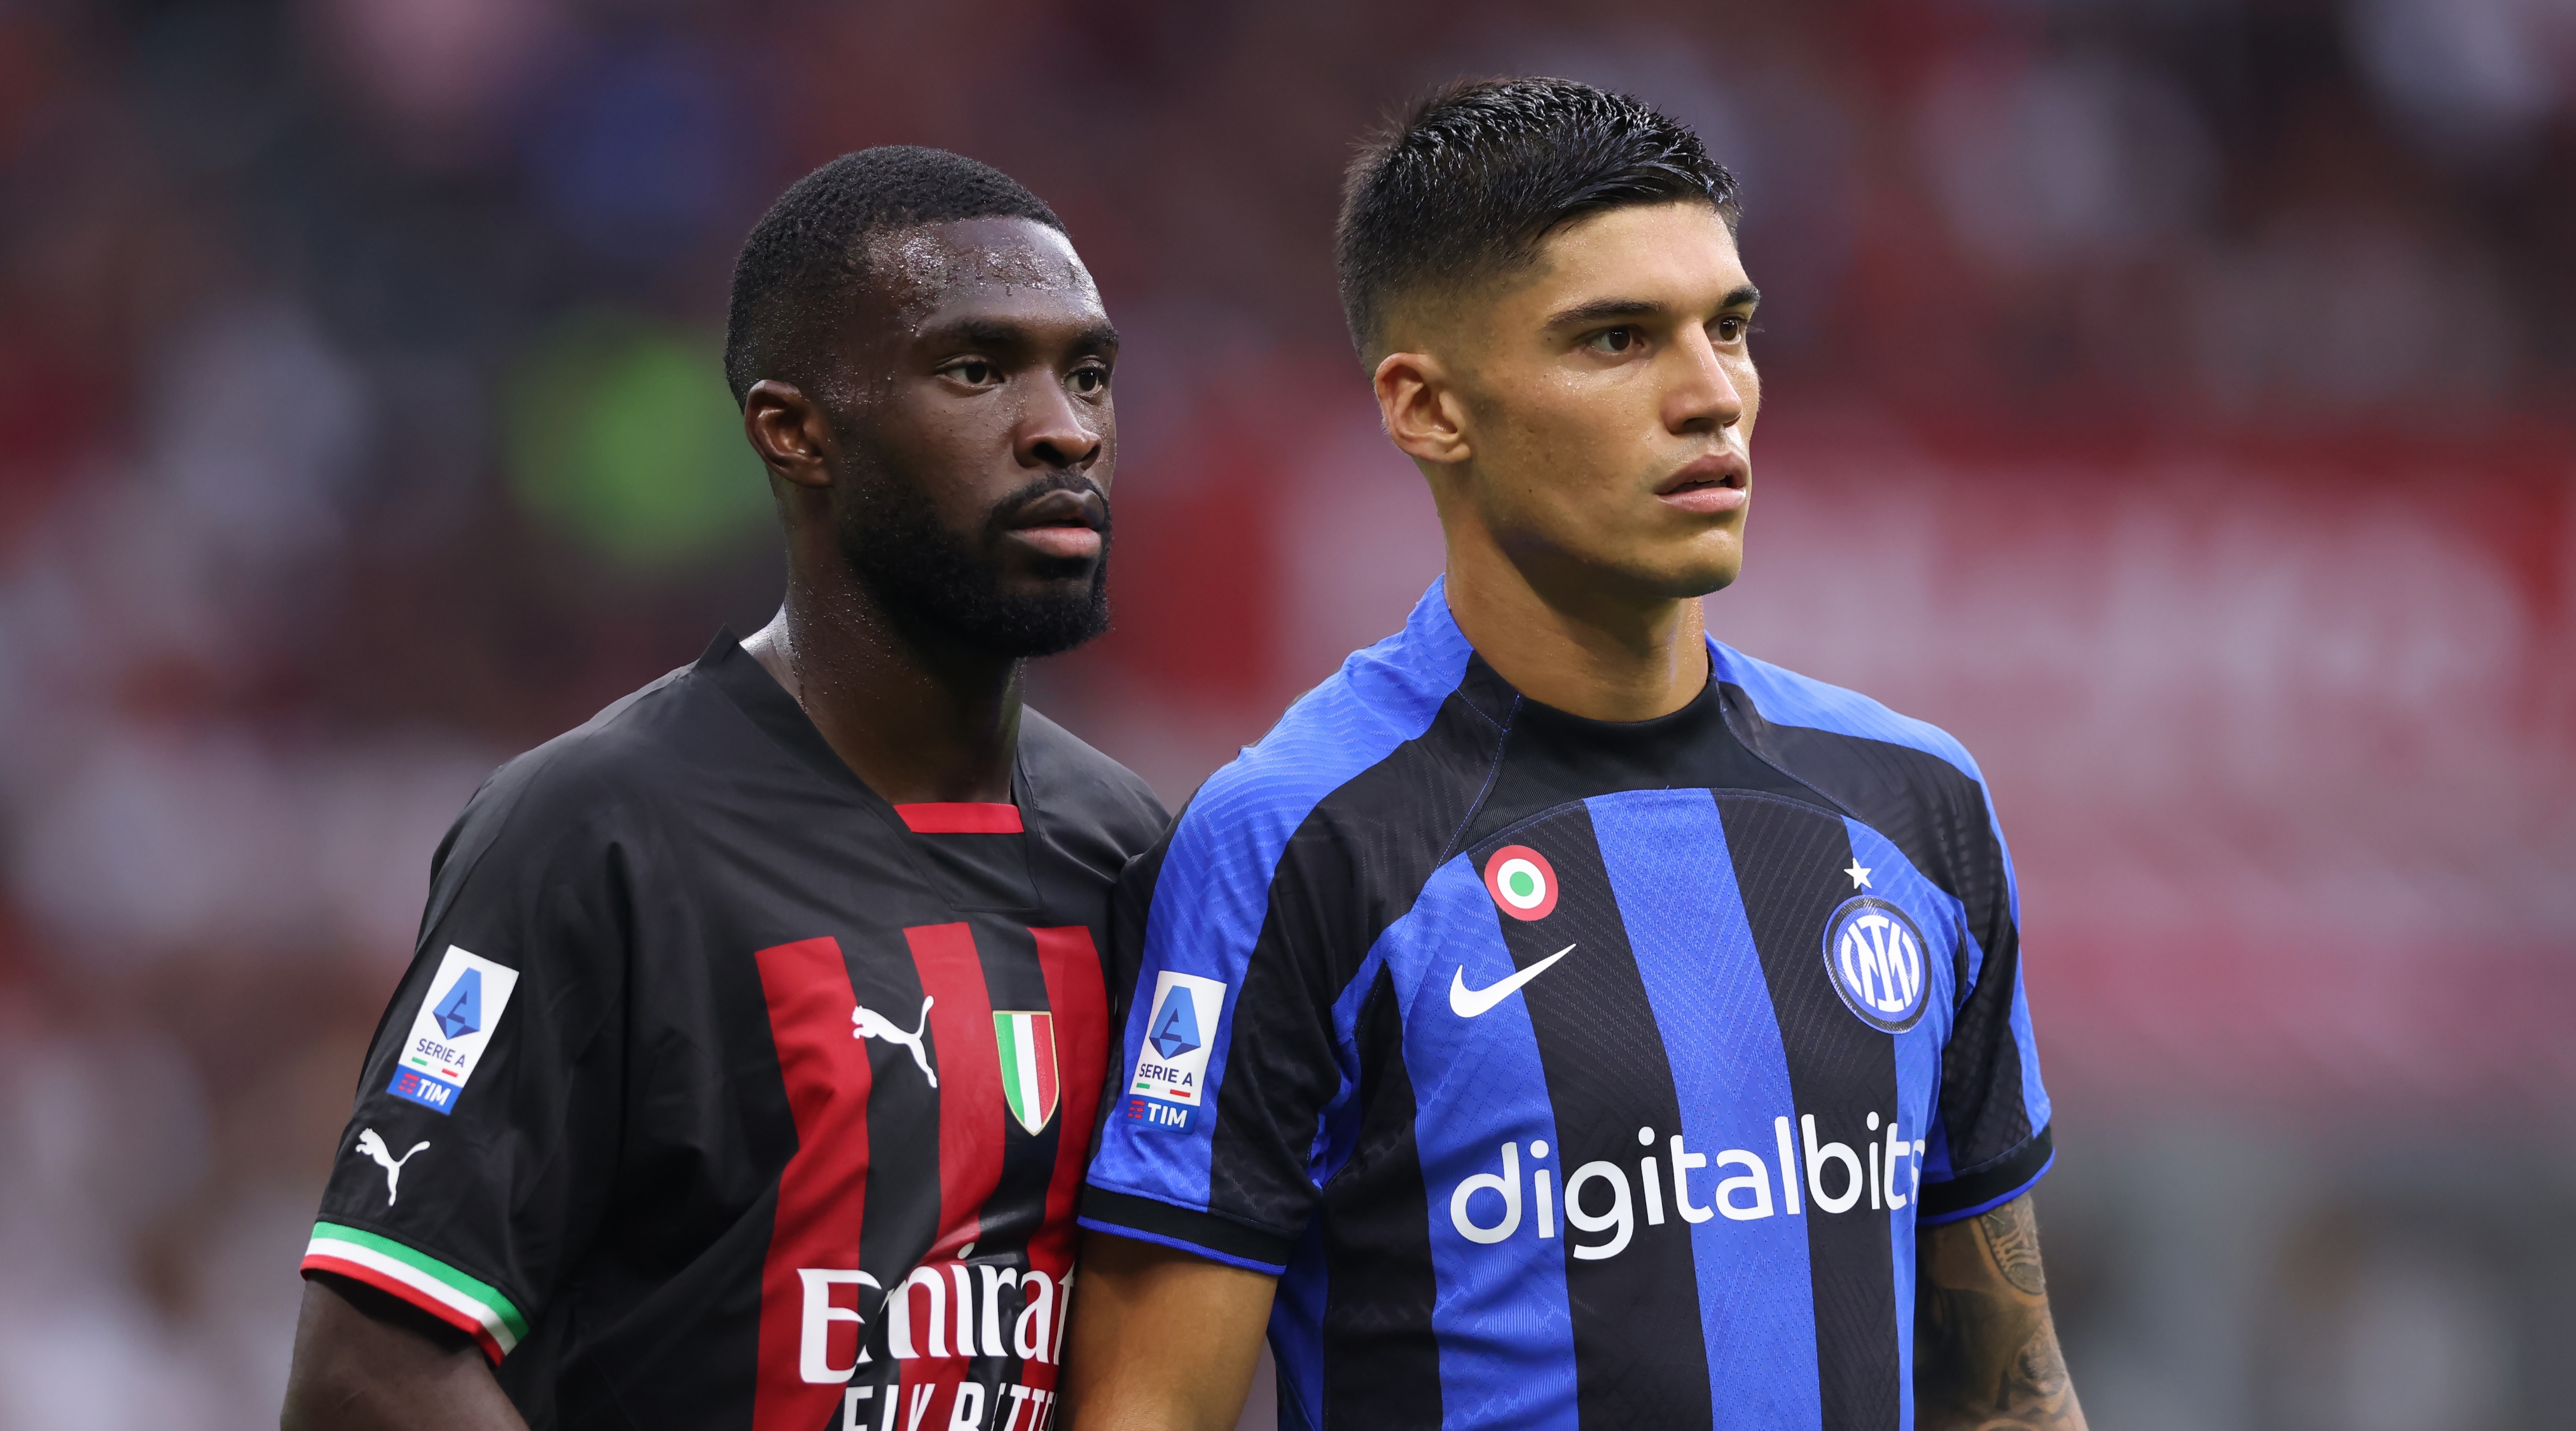 syg Certifikat schweizisk AC Milan vs Inter Milan live stream, match preview, team news and kick-off  time for this Italian Super Cup match | FourFourTwo